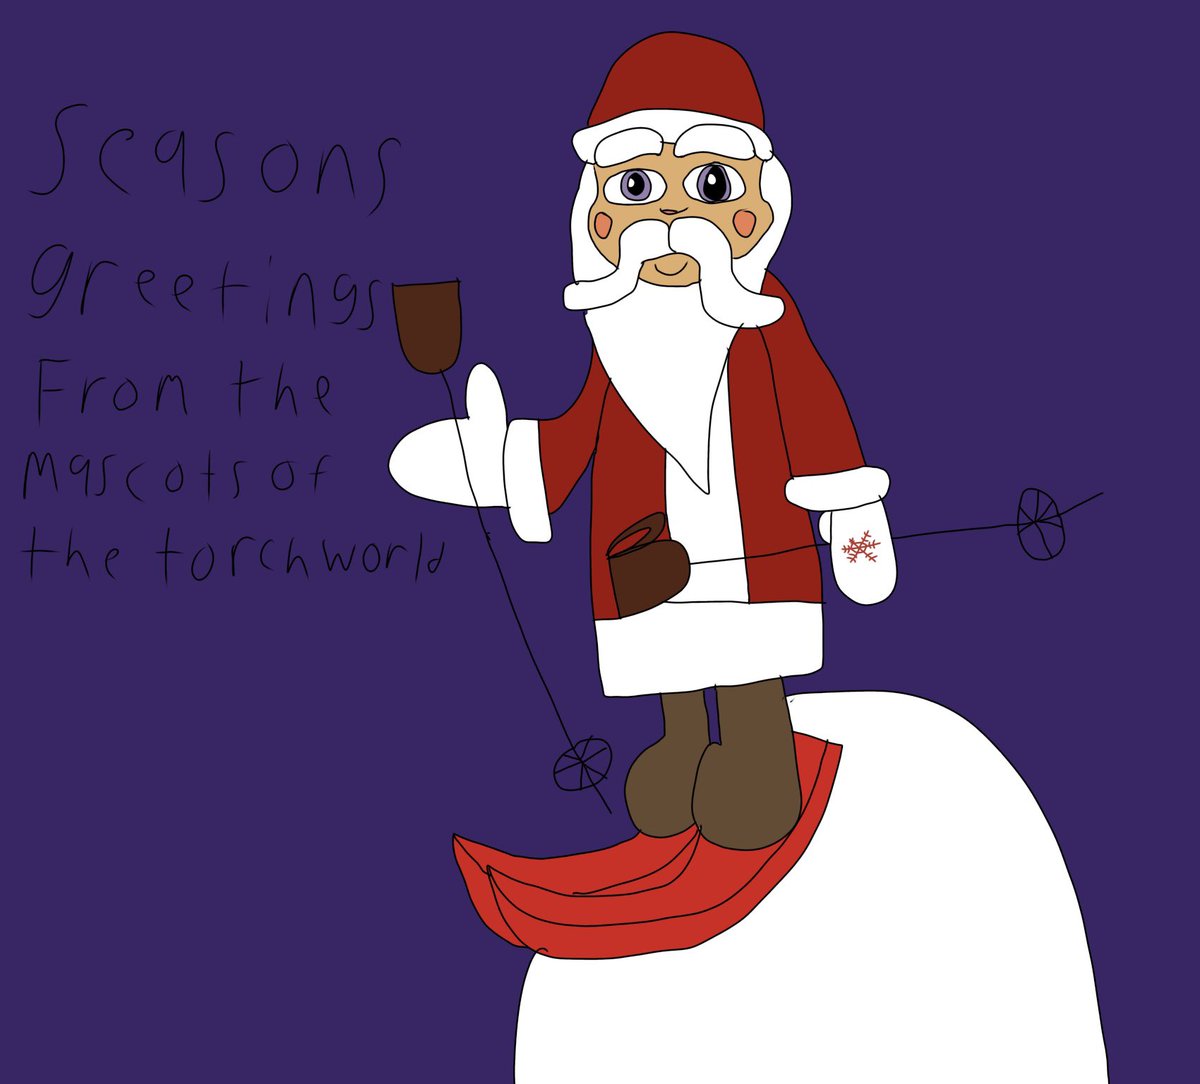 Ded moroz and the torch world citizens are wishing you a happy holidays #mascotverse #sochi2014 #olympicmascot